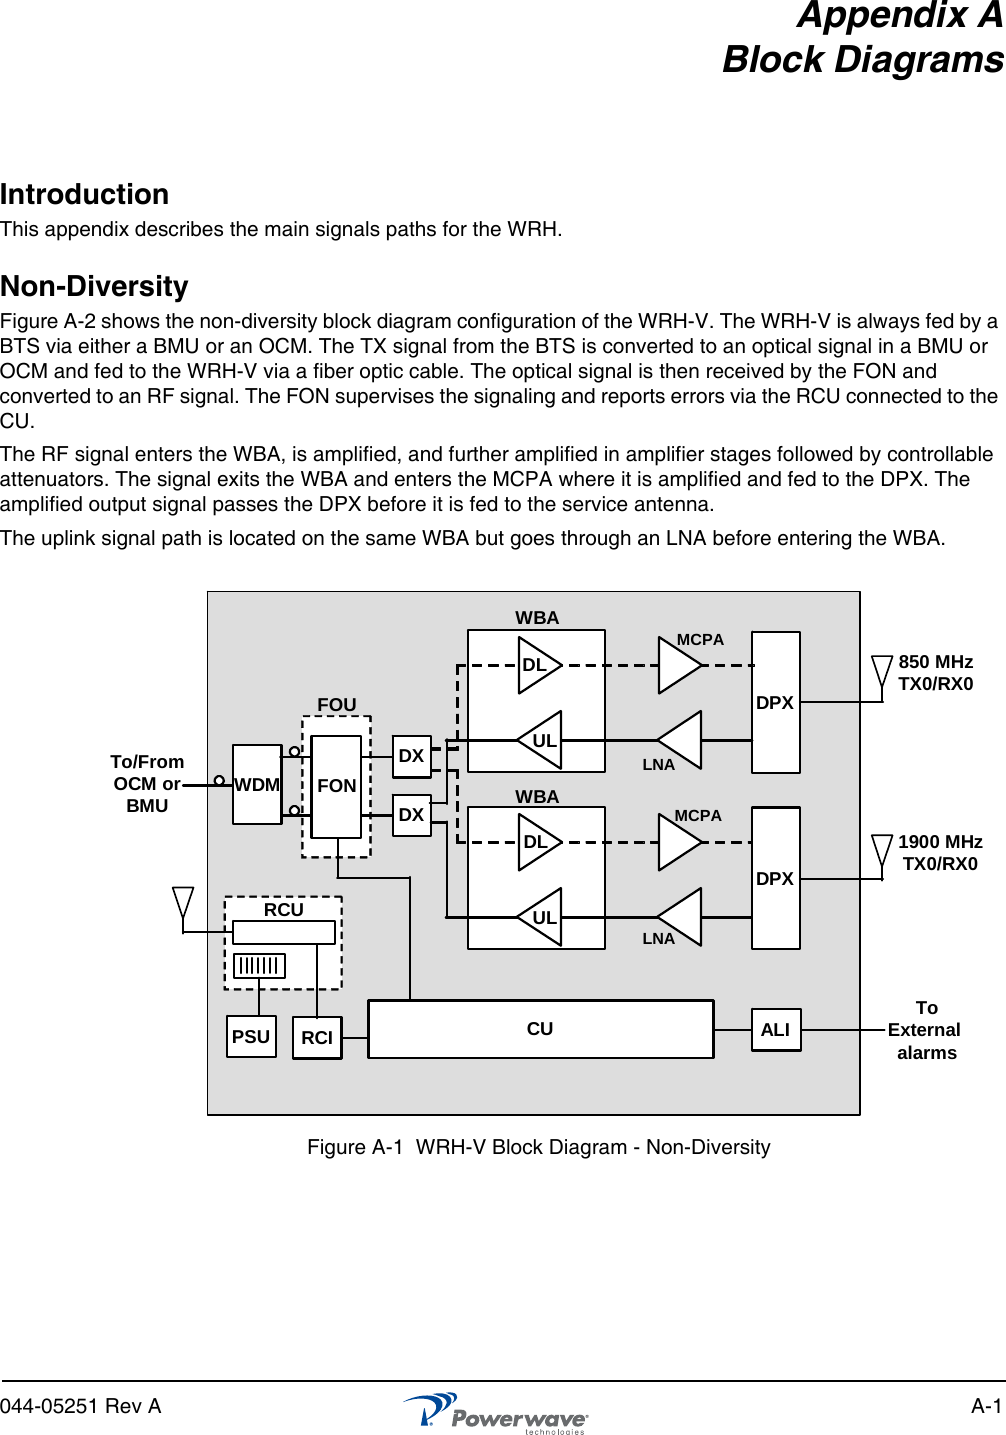 044-05251 Rev A A-1Appendix ABlock DiagramsIntroductionThis appendix describes the main signals paths for the WRH.Non-DiversityFigure A-2 shows the non-diversity block diagram configuration of the WRH-V. The WRH-V is always fed by a BTS via either a BMU or an OCM. The TX signal from the BTS is converted to an optical signal in a BMU or OCM and fed to the WRH-V via a fiber optic cable. The optical signal is then received by the FON and converted to an RF signal. The FON supervises the signaling and reports errors via the RCU connected to the CU.The RF signal enters the WBA, is amplified, and further amplified in amplifier stages followed by controllable attenuators. The signal exits the WBA and enters the MCPA where it is amplified and fed to the DPX. The amplified output signal passes the DPX before it is fed to the service antenna.The uplink signal path is located on the same WBA but goes through an LNA before entering the WBA.Figure A-1  WRH-V Block Diagram - Non-DiversityWDMFOUDXDXDPXDPXWBAWBADLDLULUL LNALNAMCPAMCPATo/FromOCM orBMURCURCIPSU CUFONALI ToExternal alarms850 MHzTX0/RX01900 MHzTX0/RX0